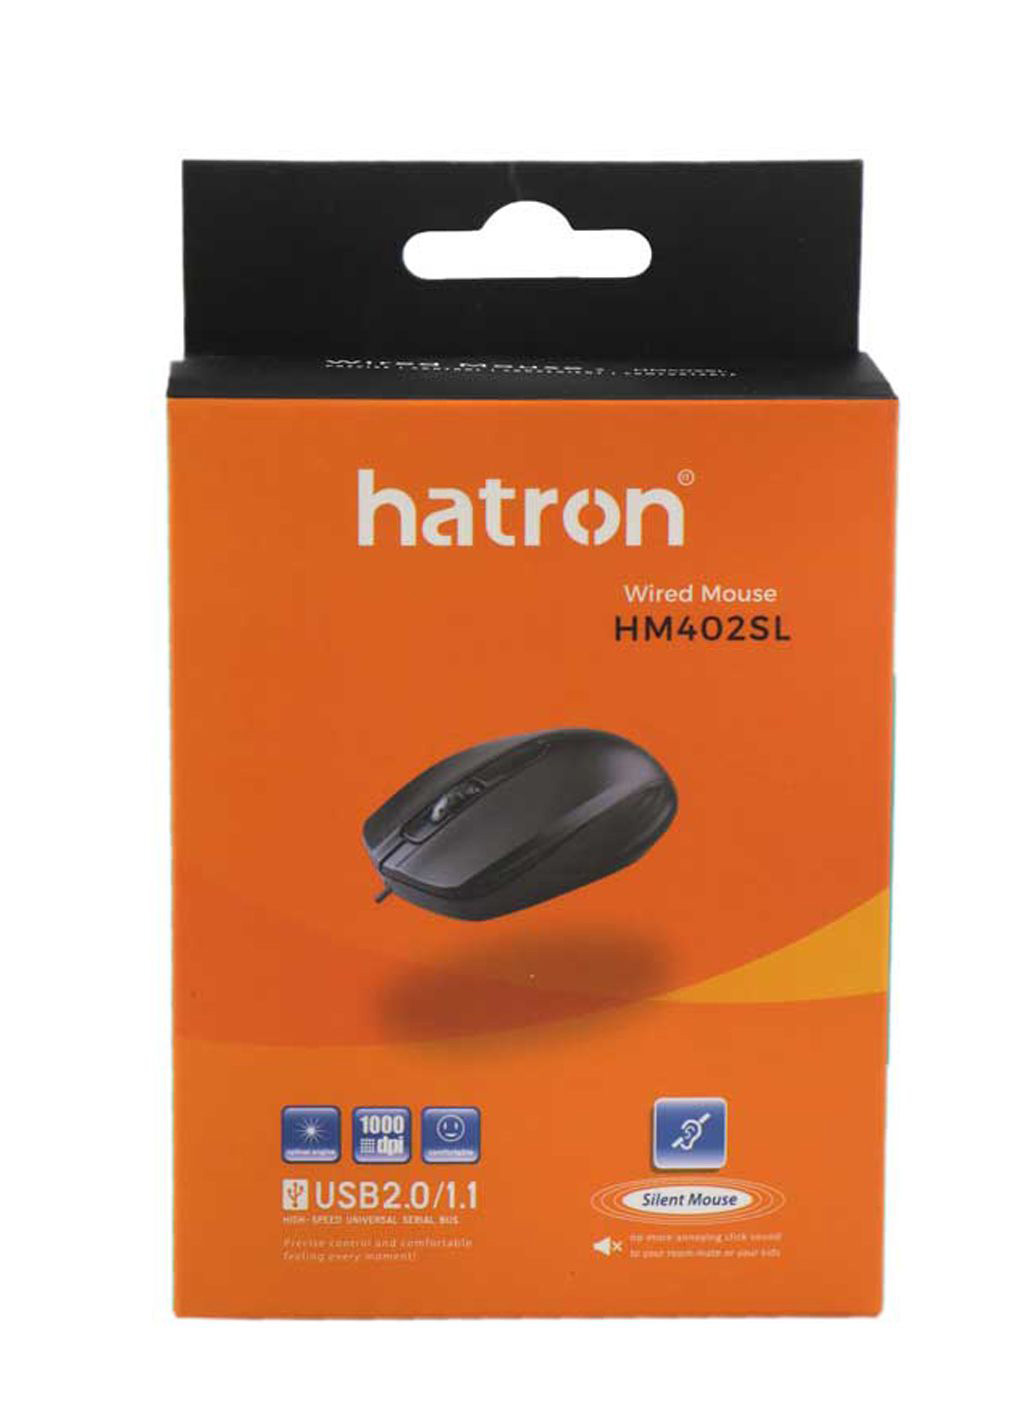 Hatron HM402SL wired mouse%20(3)